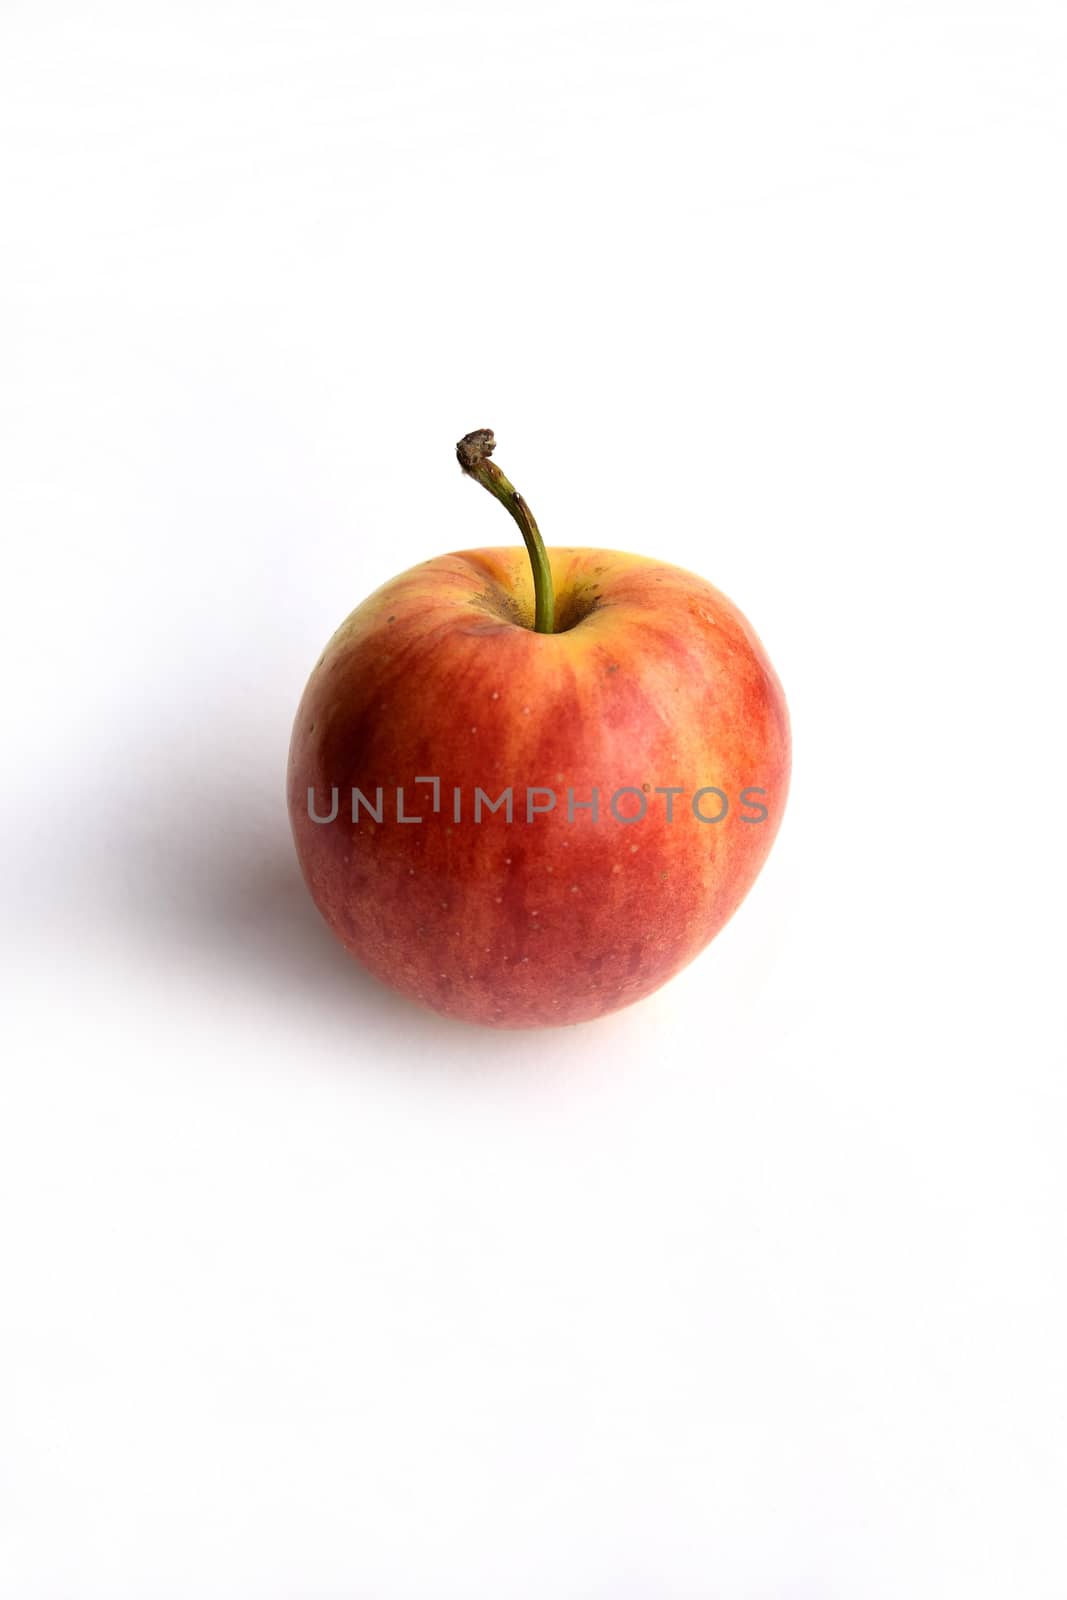 pink apple on white background.